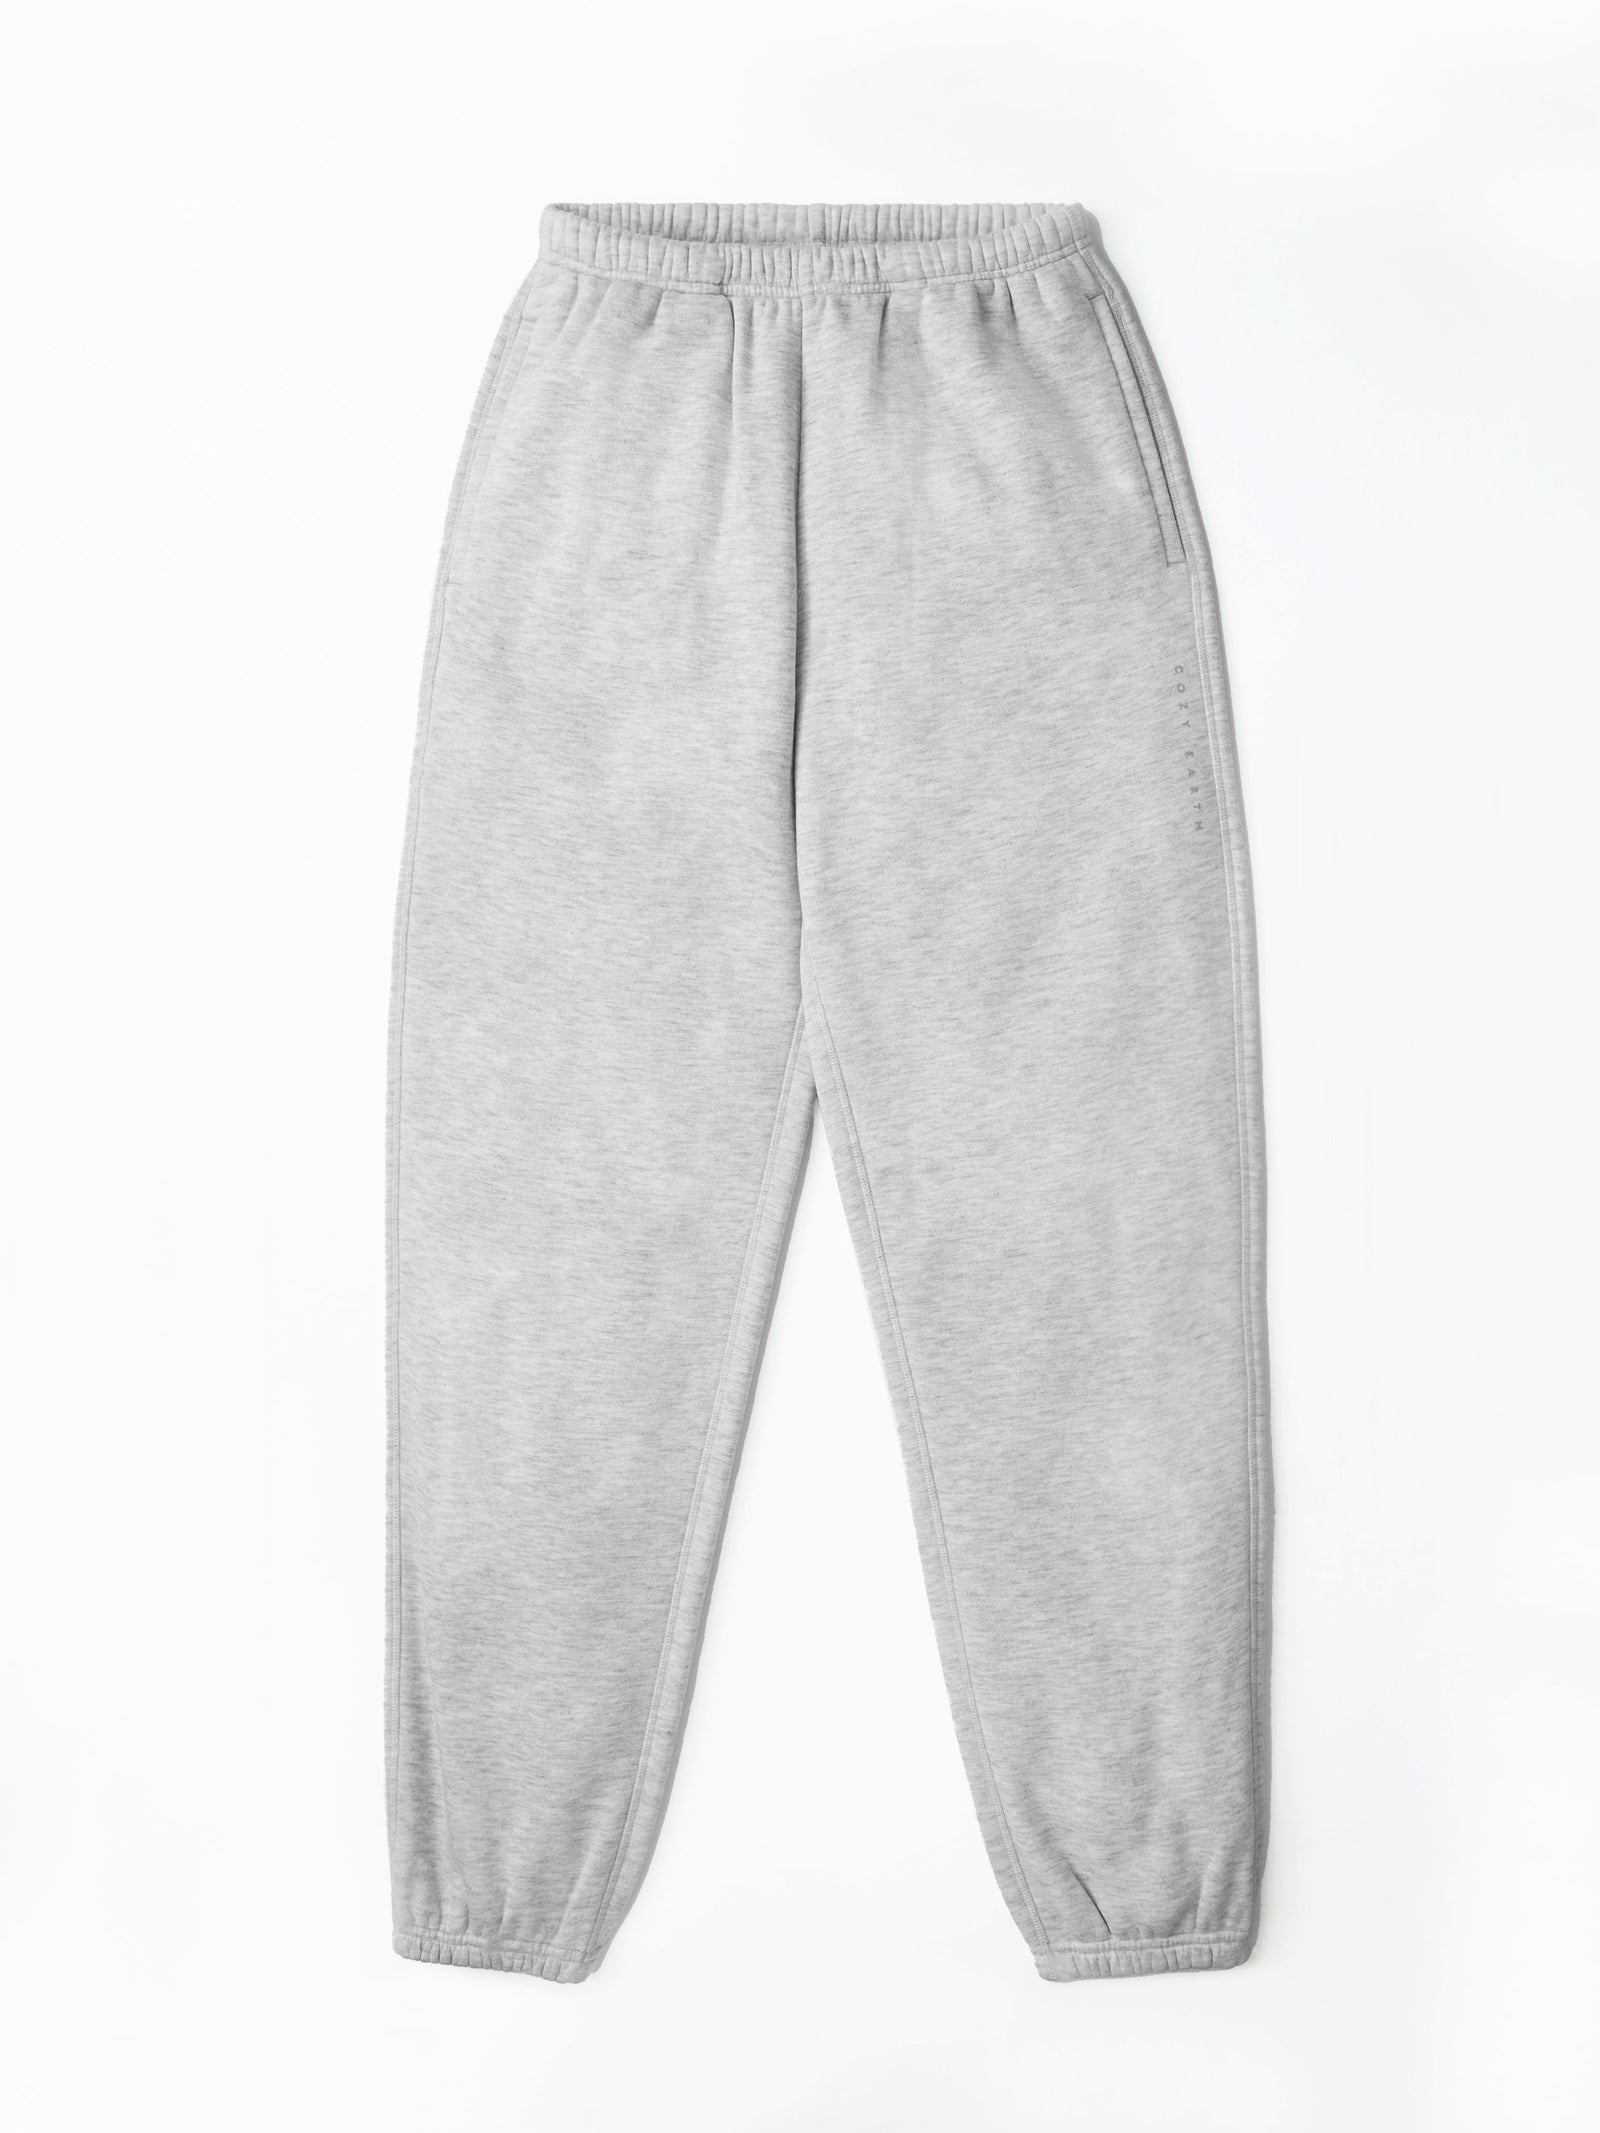 Heather Grey CityScape Joggers. The Joggers are laying flat over a white background. 